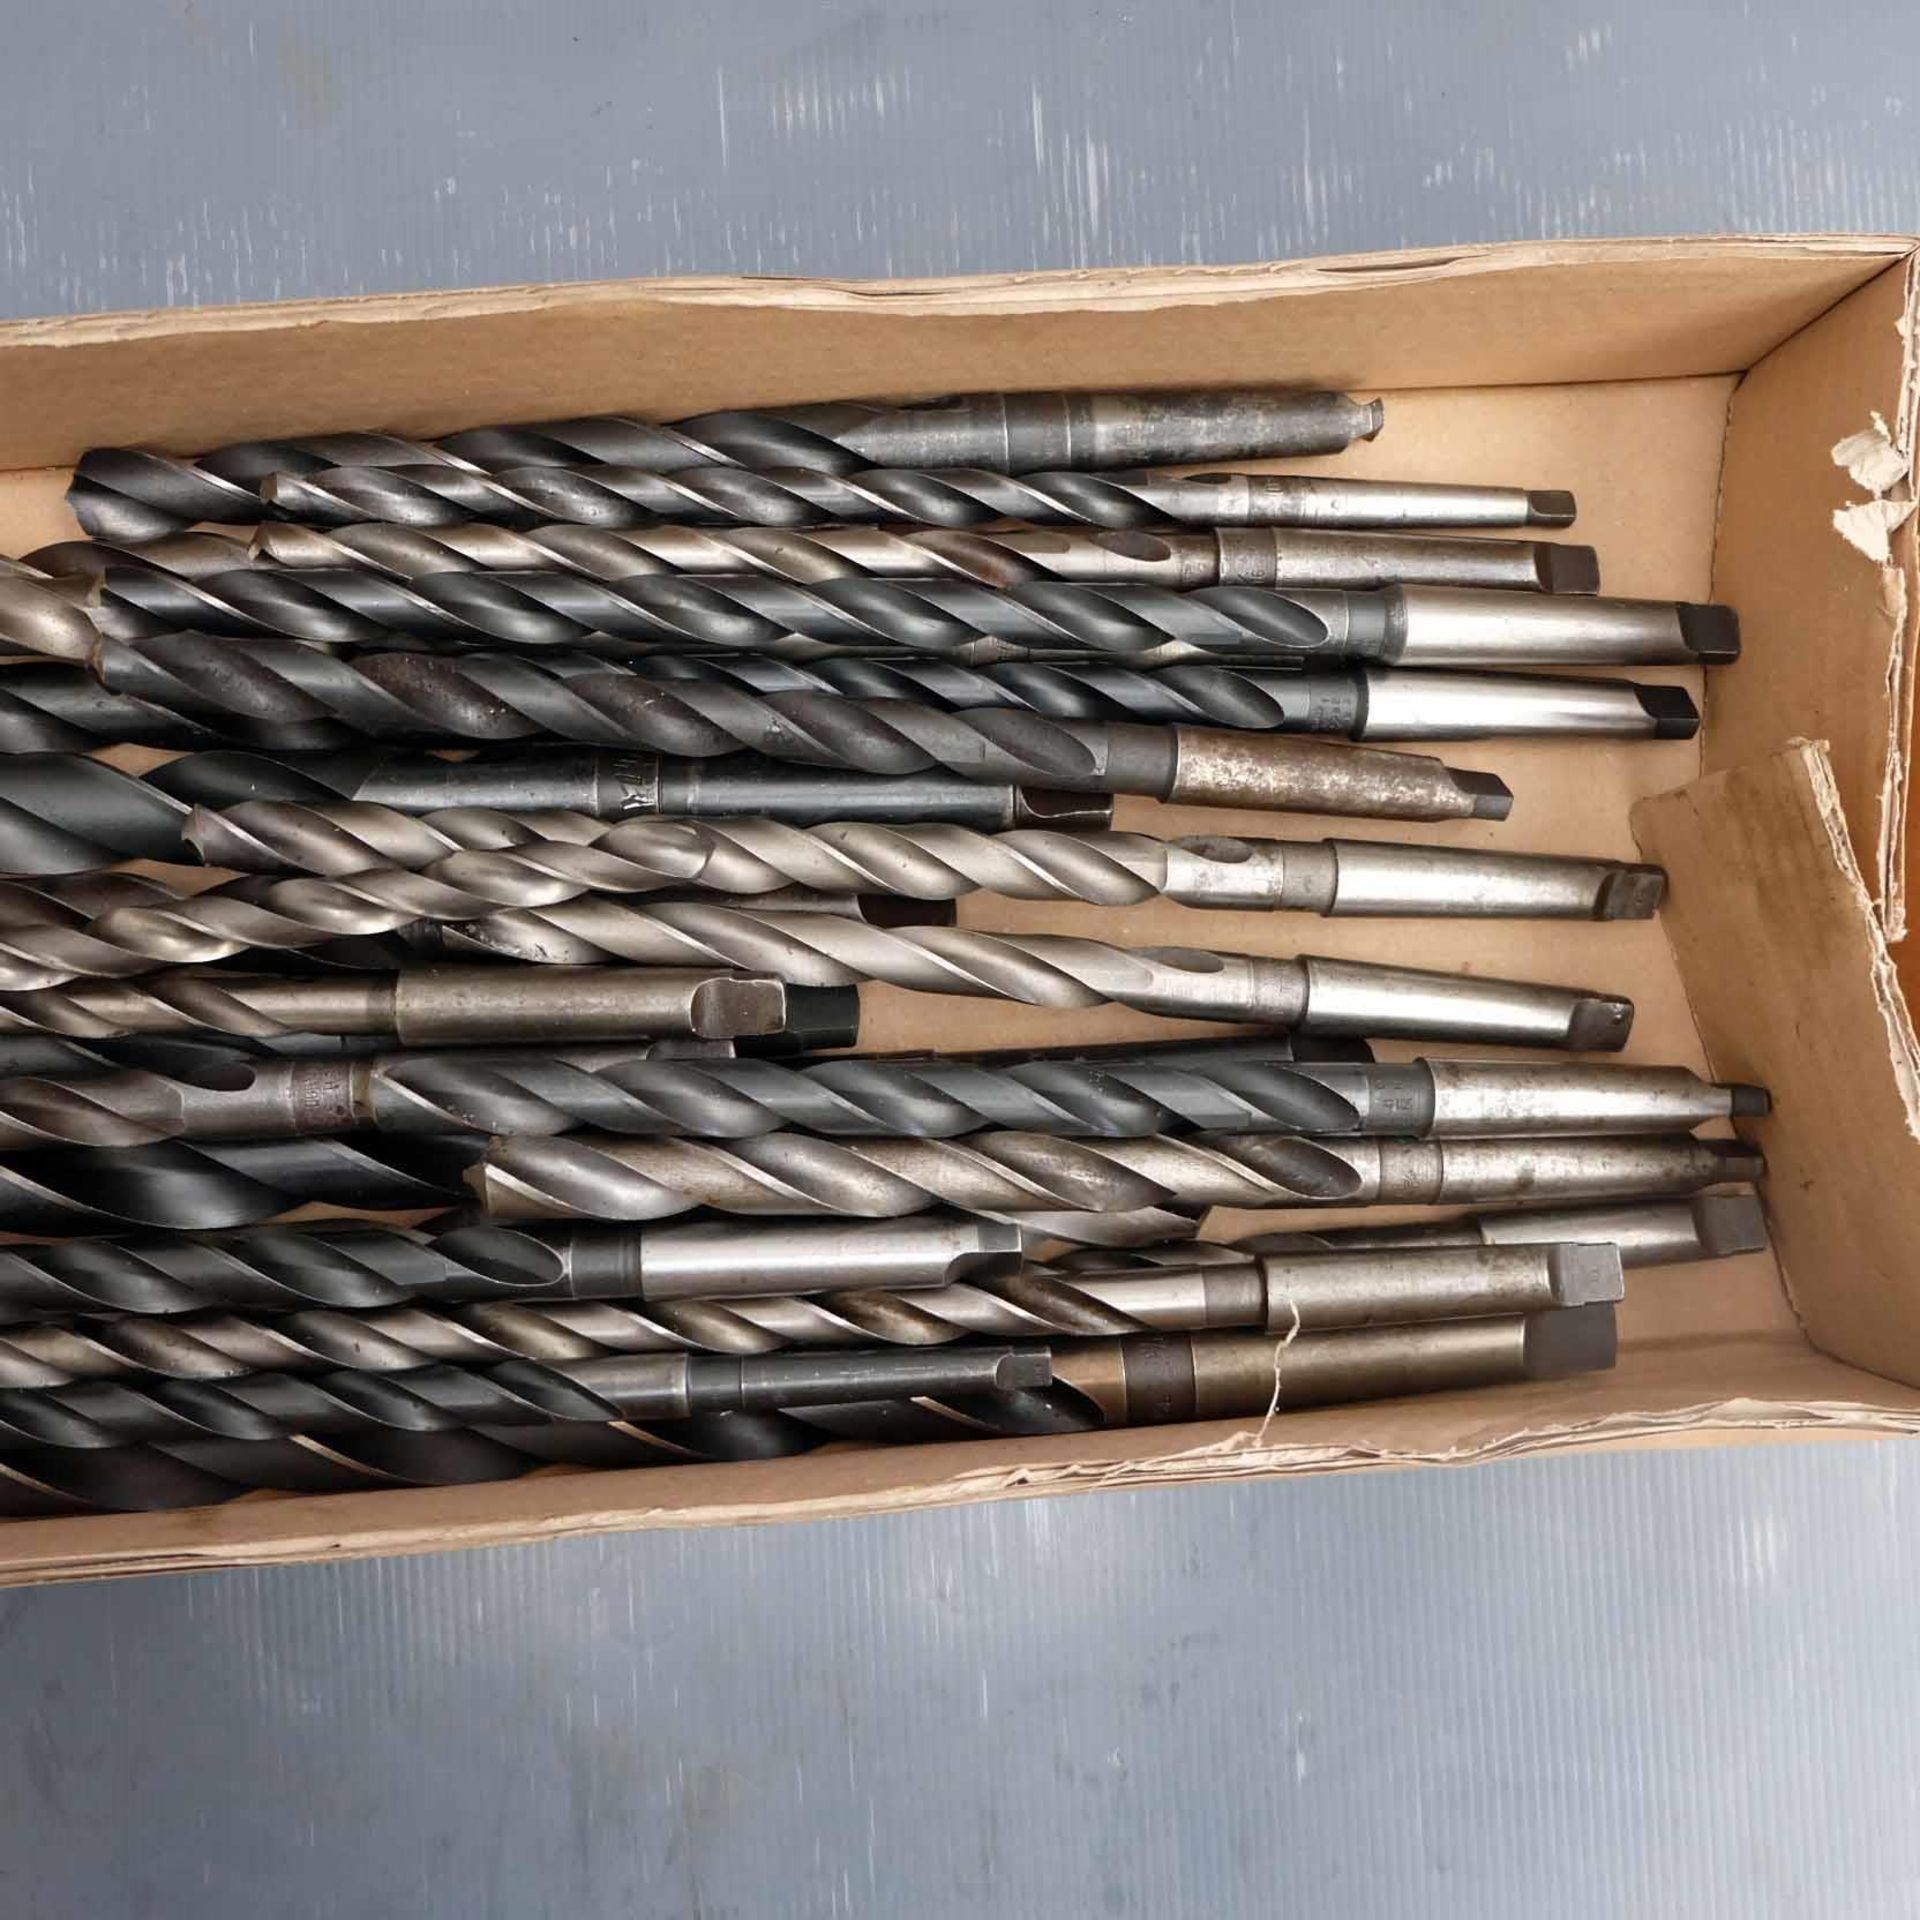 Quantity of Long Series Twist Drills. Various Imperial Sizes. 1 - 3 MT. - Image 3 of 3